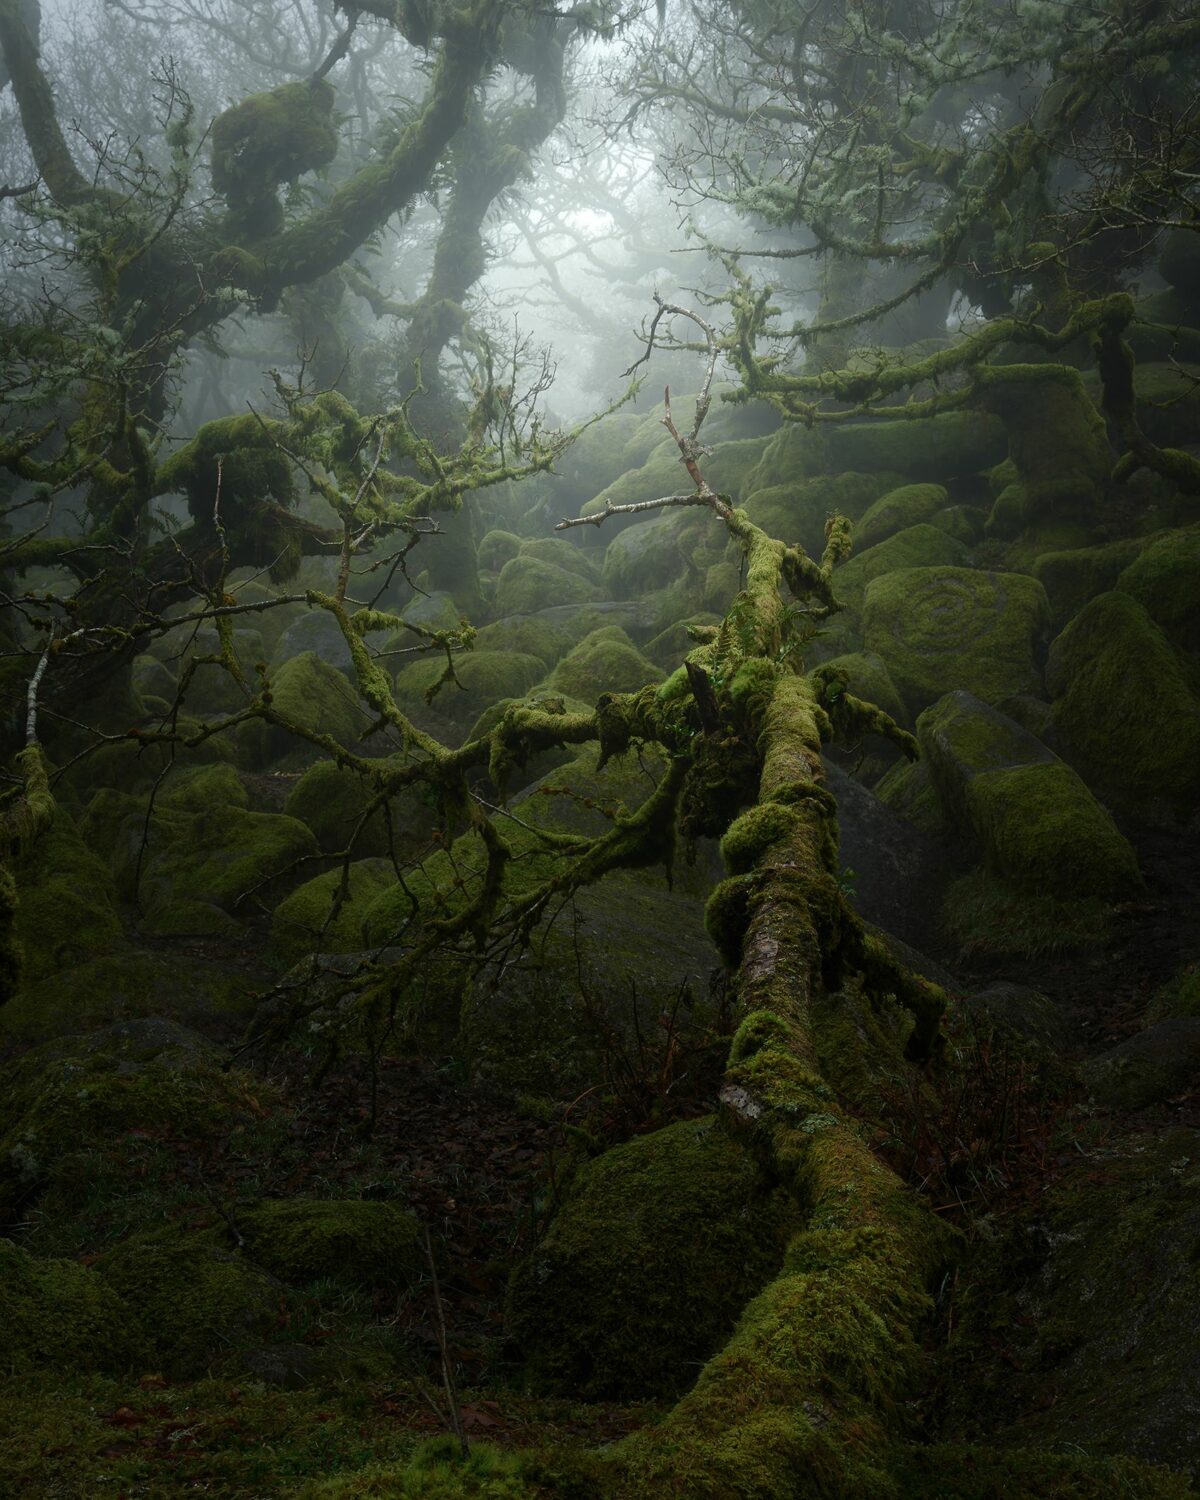 Mystical Enchanting Photography Series Of Mossy And Foggy Forests By Neil Burnell 1